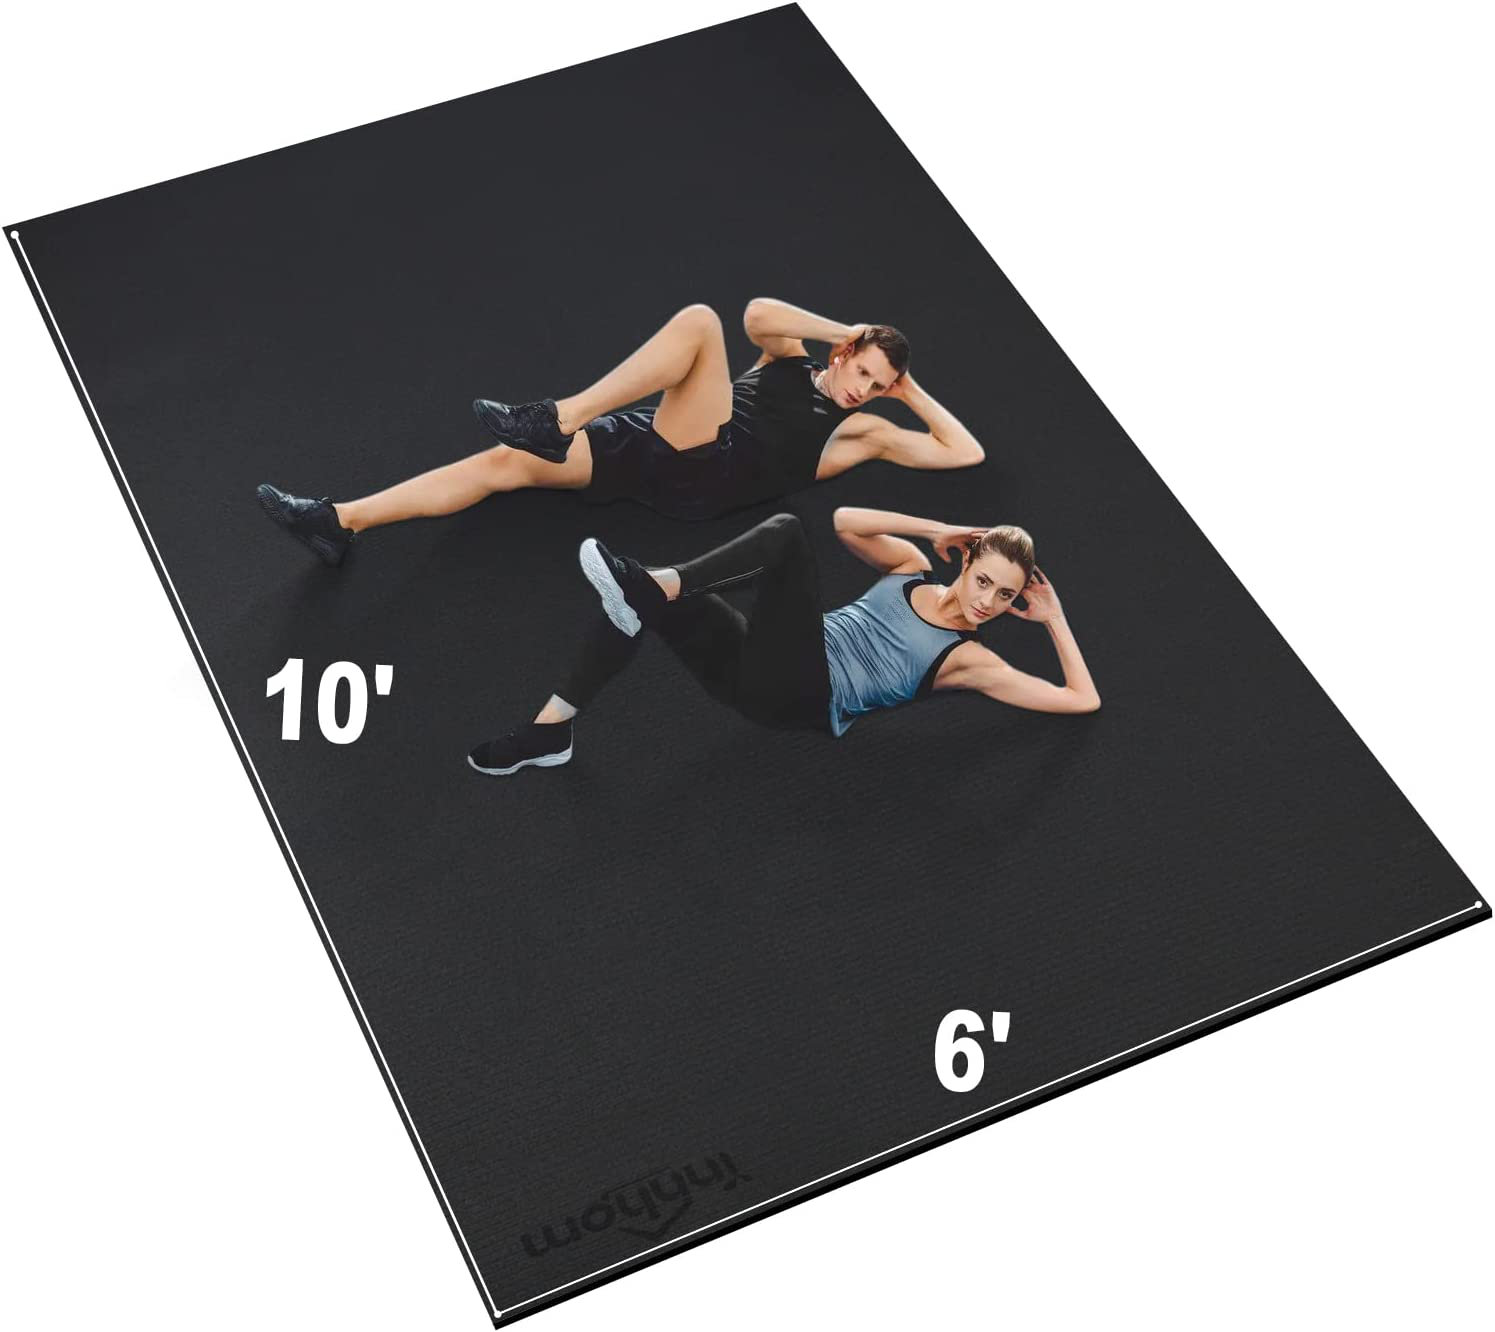 Large Yoga Mat 6' x 4' x 8 mm Thick Workout Mats for Home Gym Flooring Black